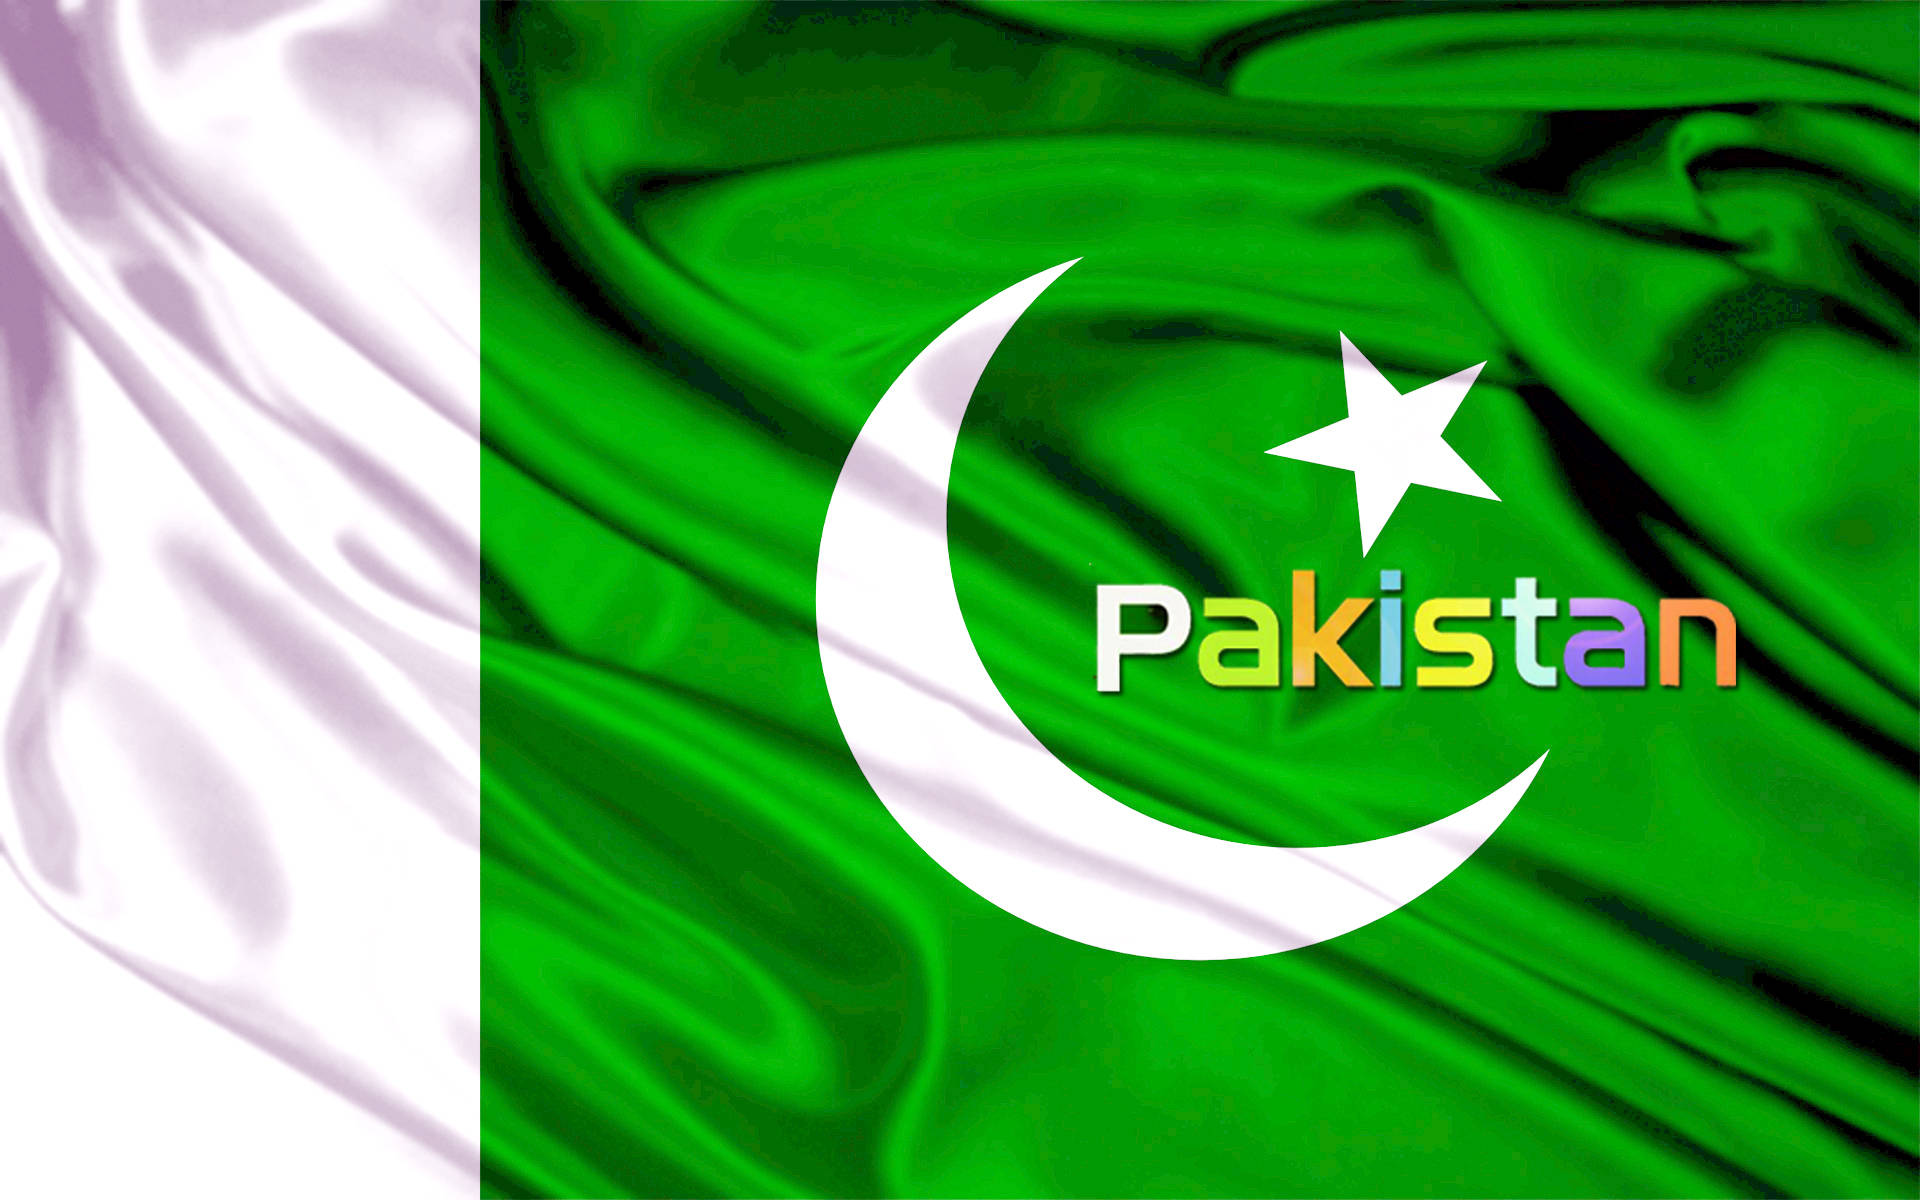 Pakistan Flag With Different Colored Letters Background